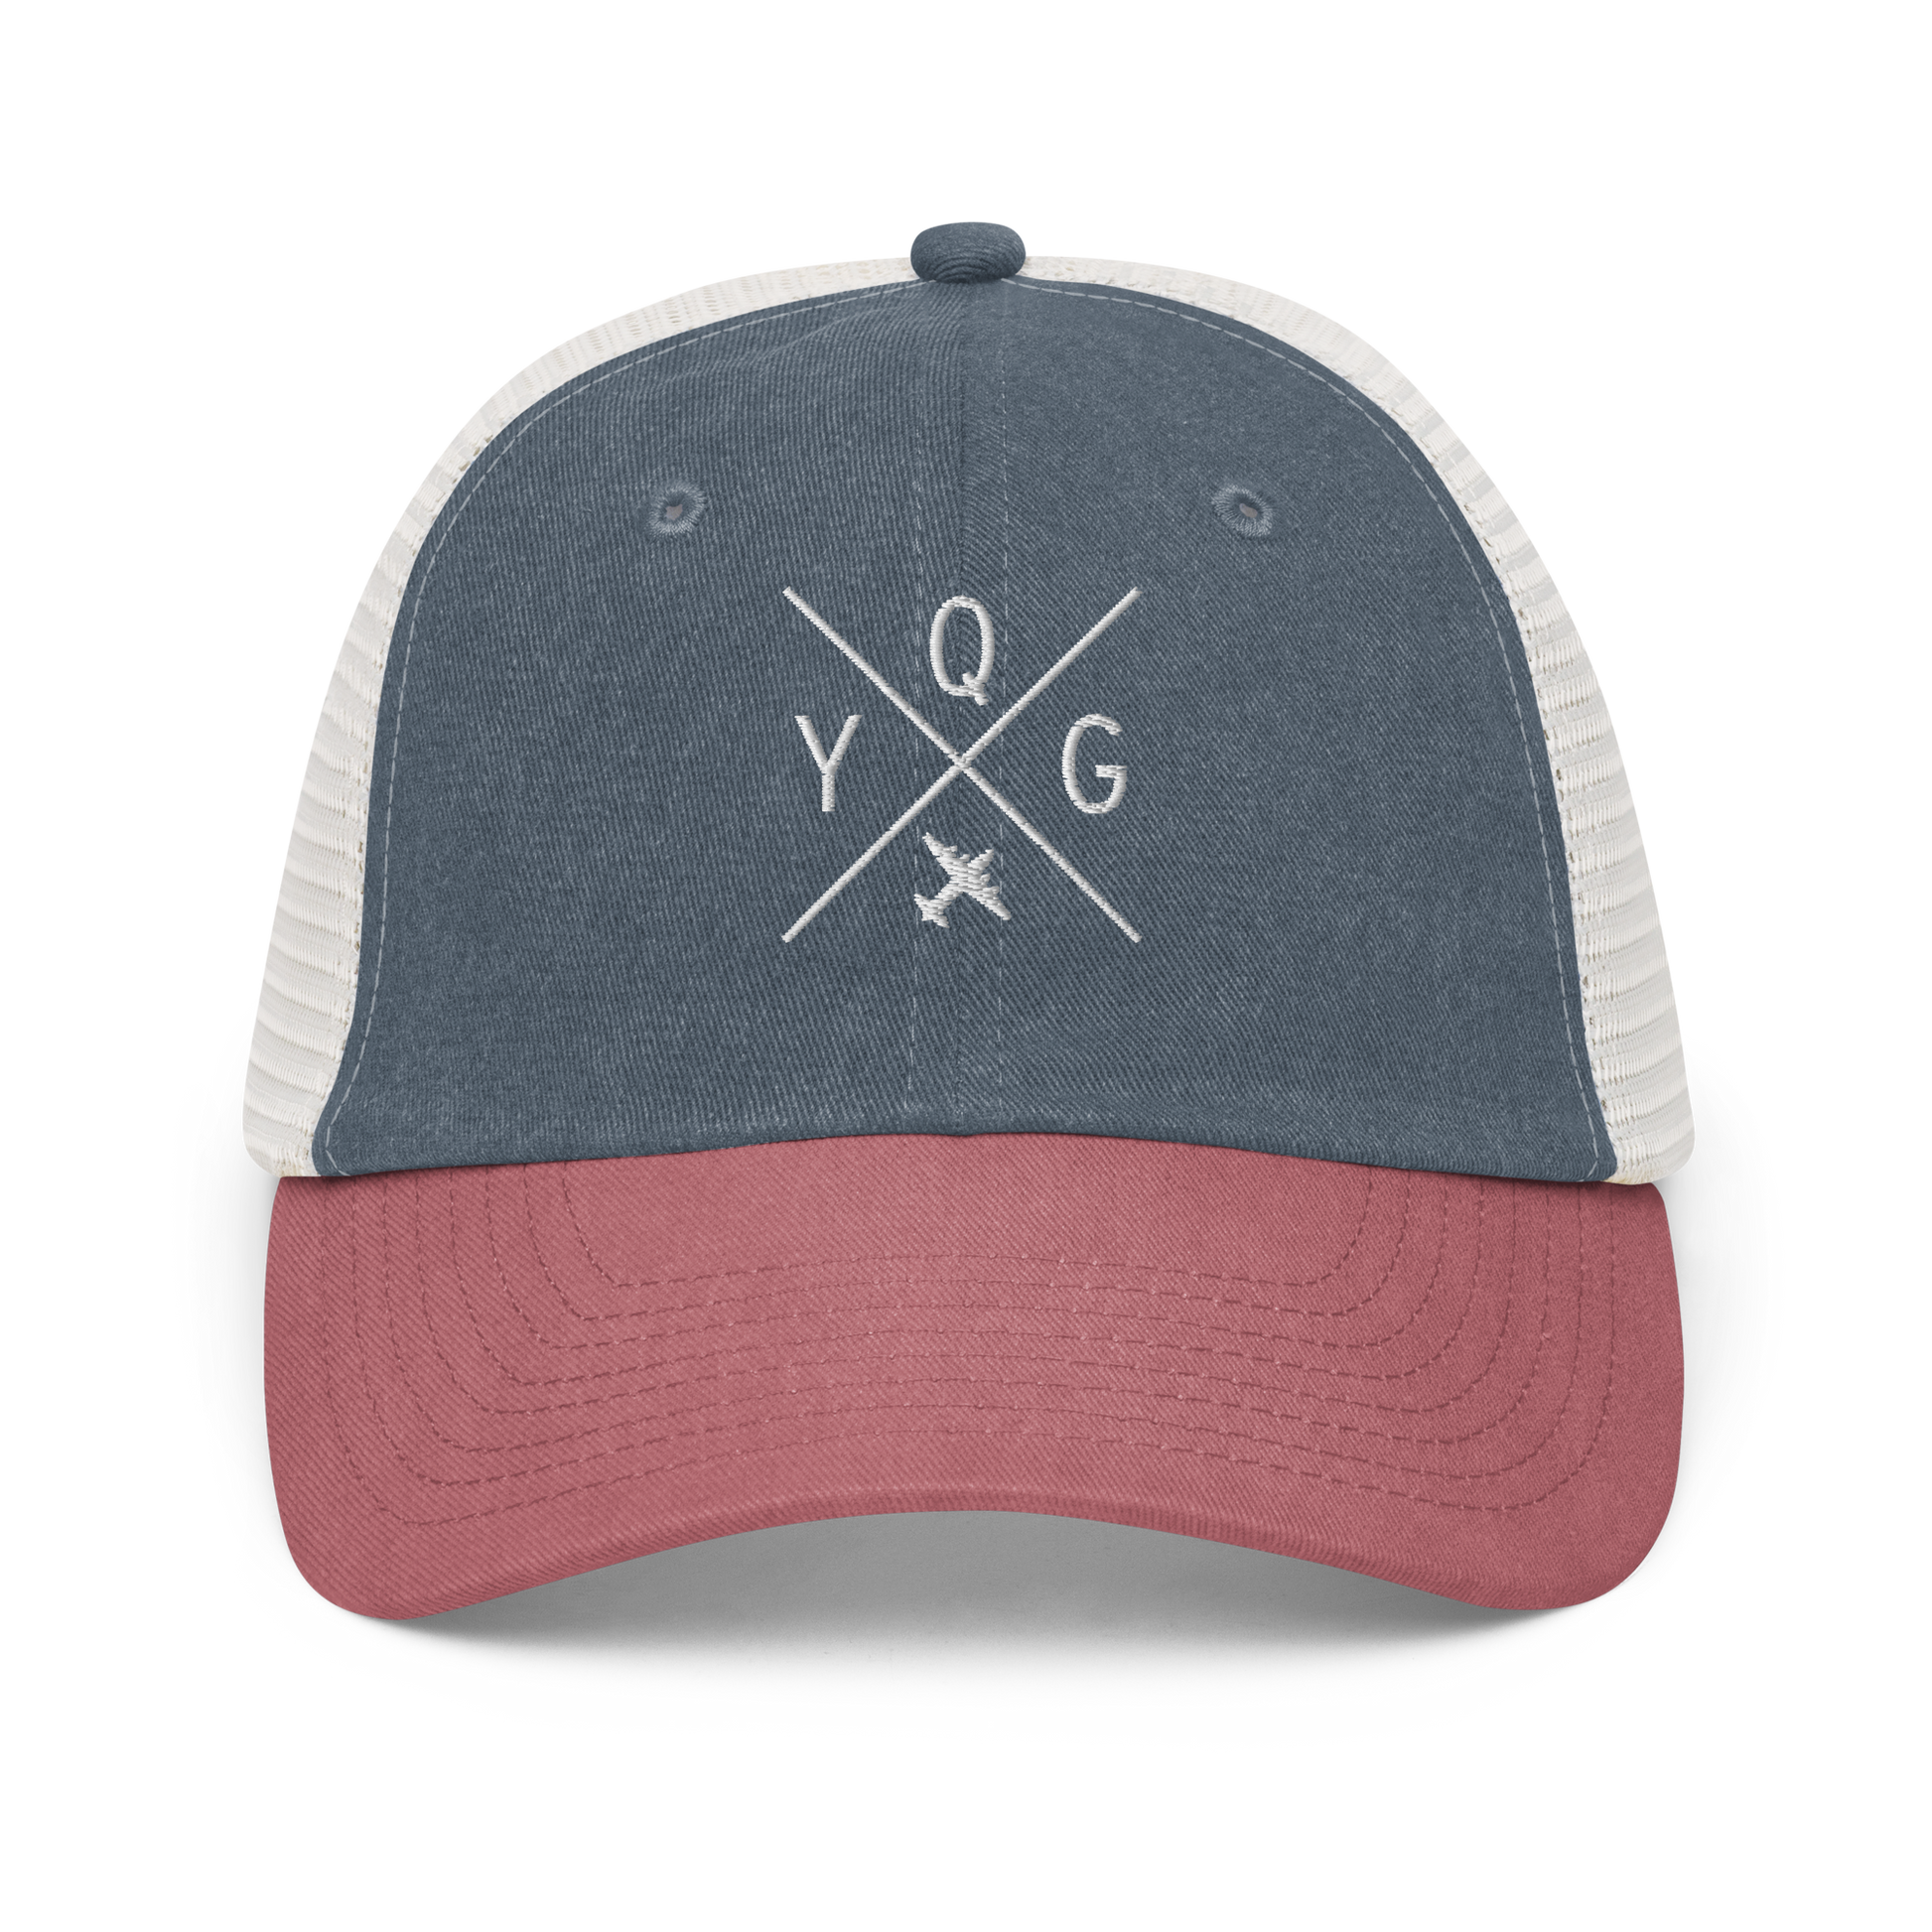 YHM Designs - YQG Windsor Pigment-Dyed Trucker Cap - Crossed-X Design with Airport Code and Vintage Propliner - White Embroidery - Image 12